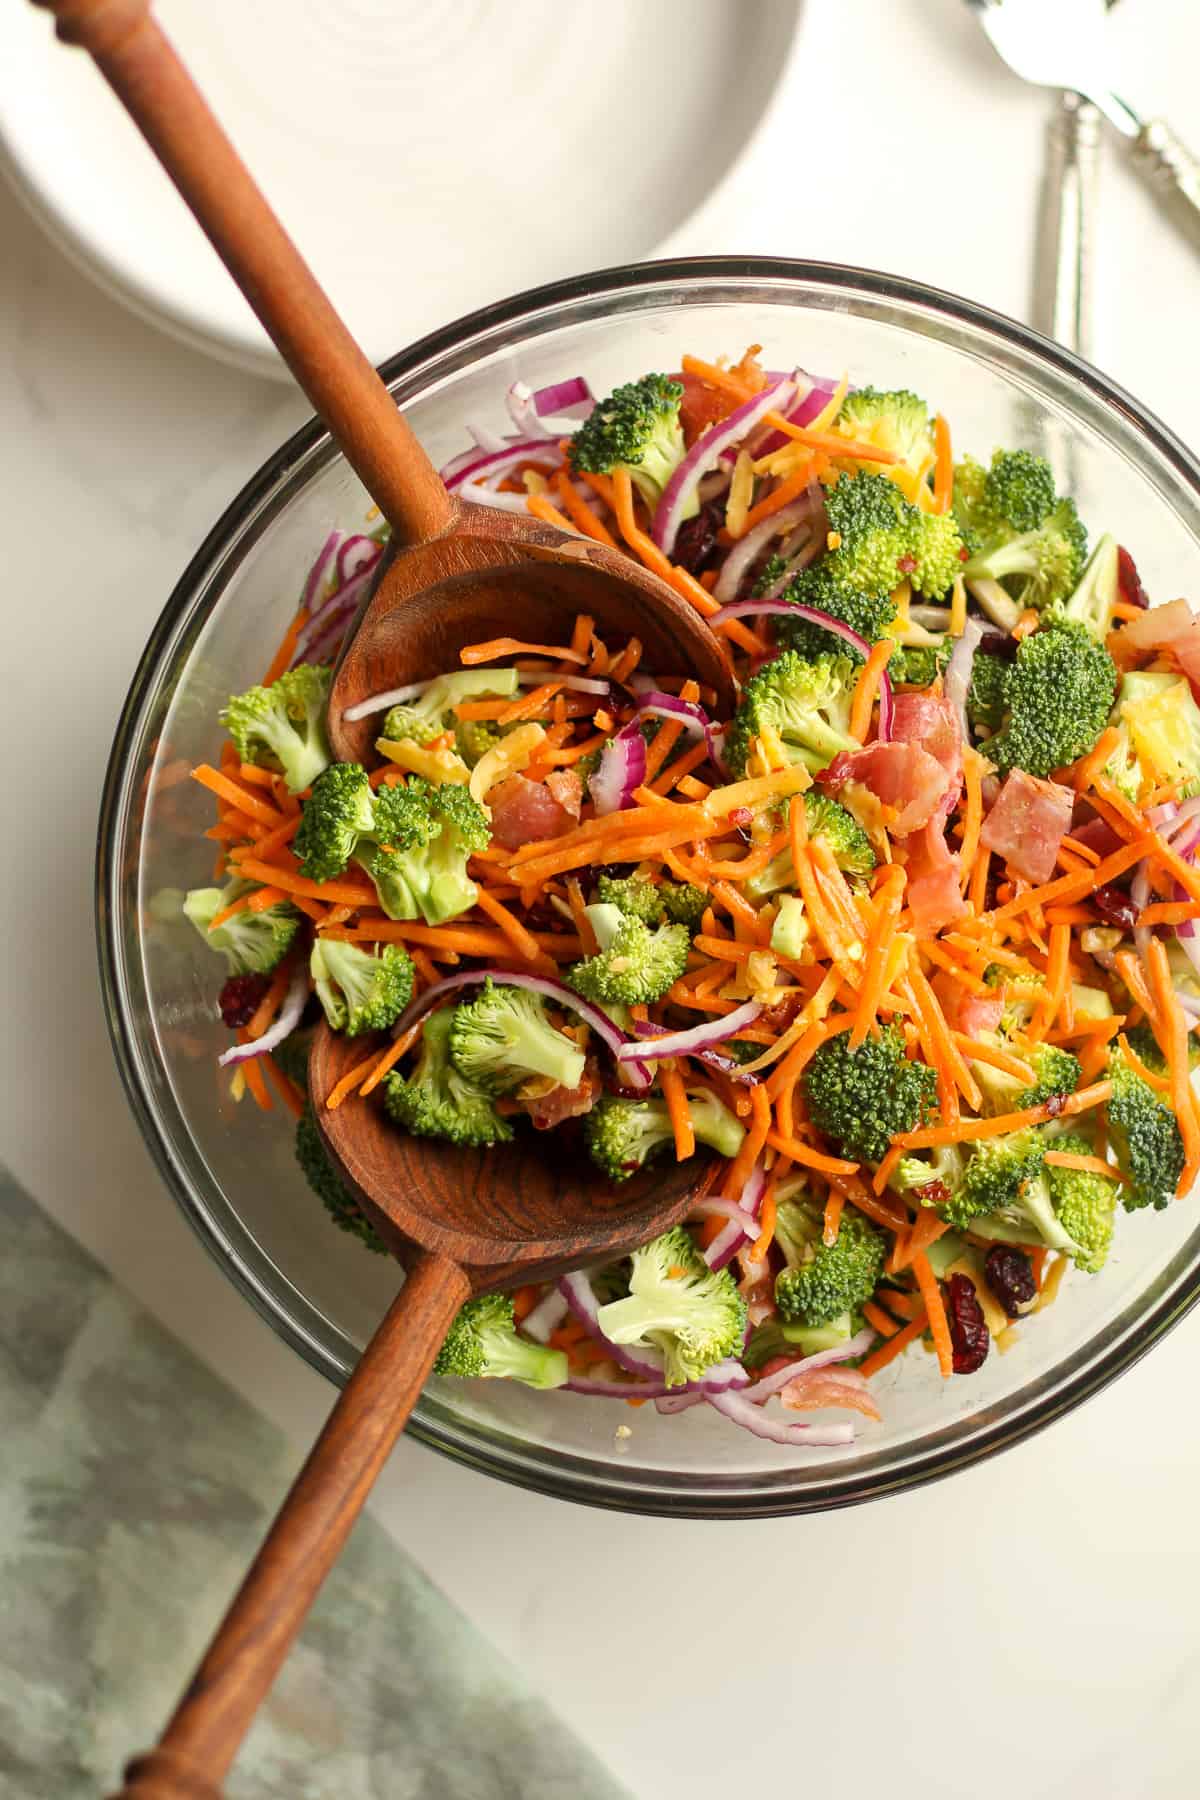 The broccoli salad with two wooden spoons inside.